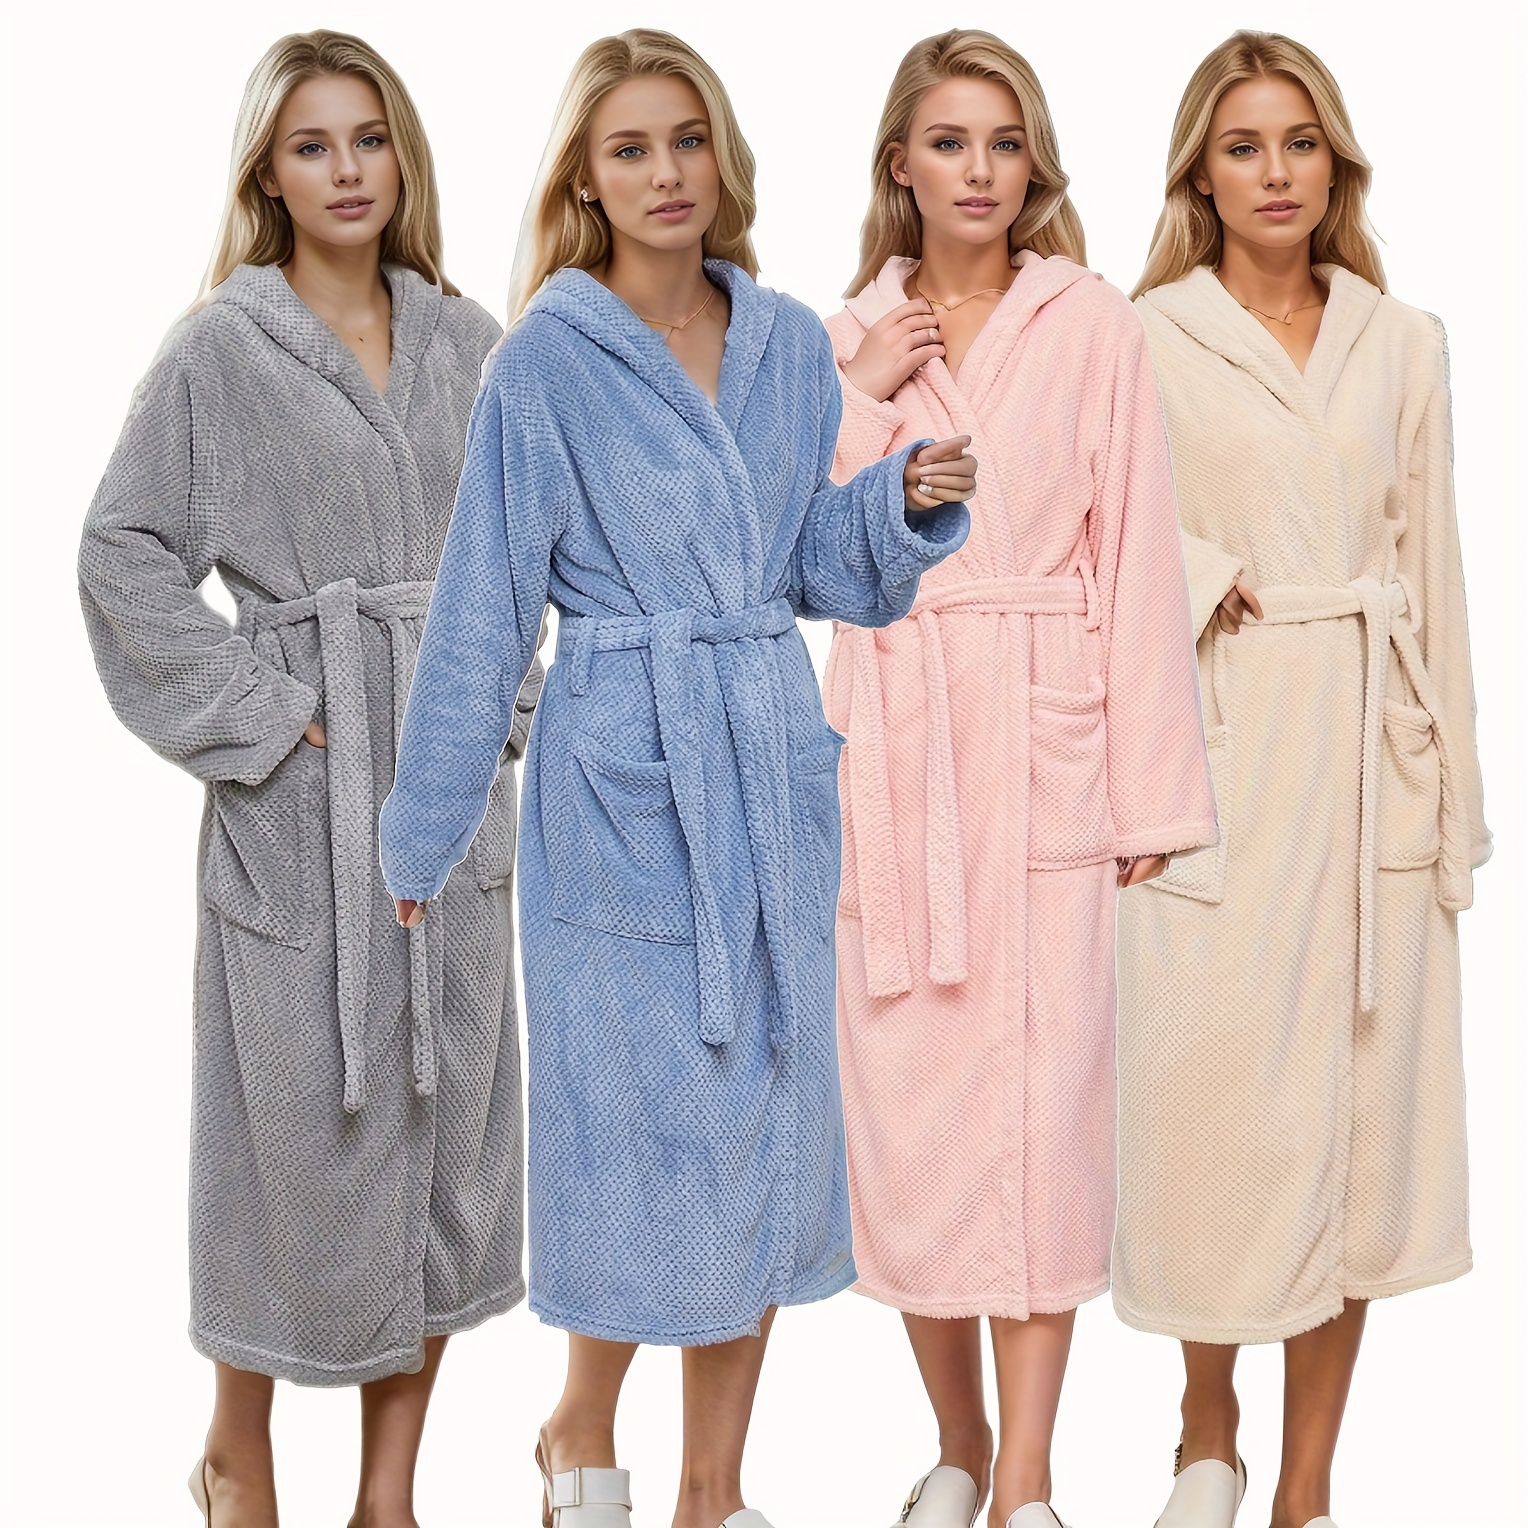 

Ultra-absorbent Women's Hooded Bathrobe With Pockets - Long Sleeve, Plaid Design For Shower & Spa, Includes Large Bath Towel And Skirt